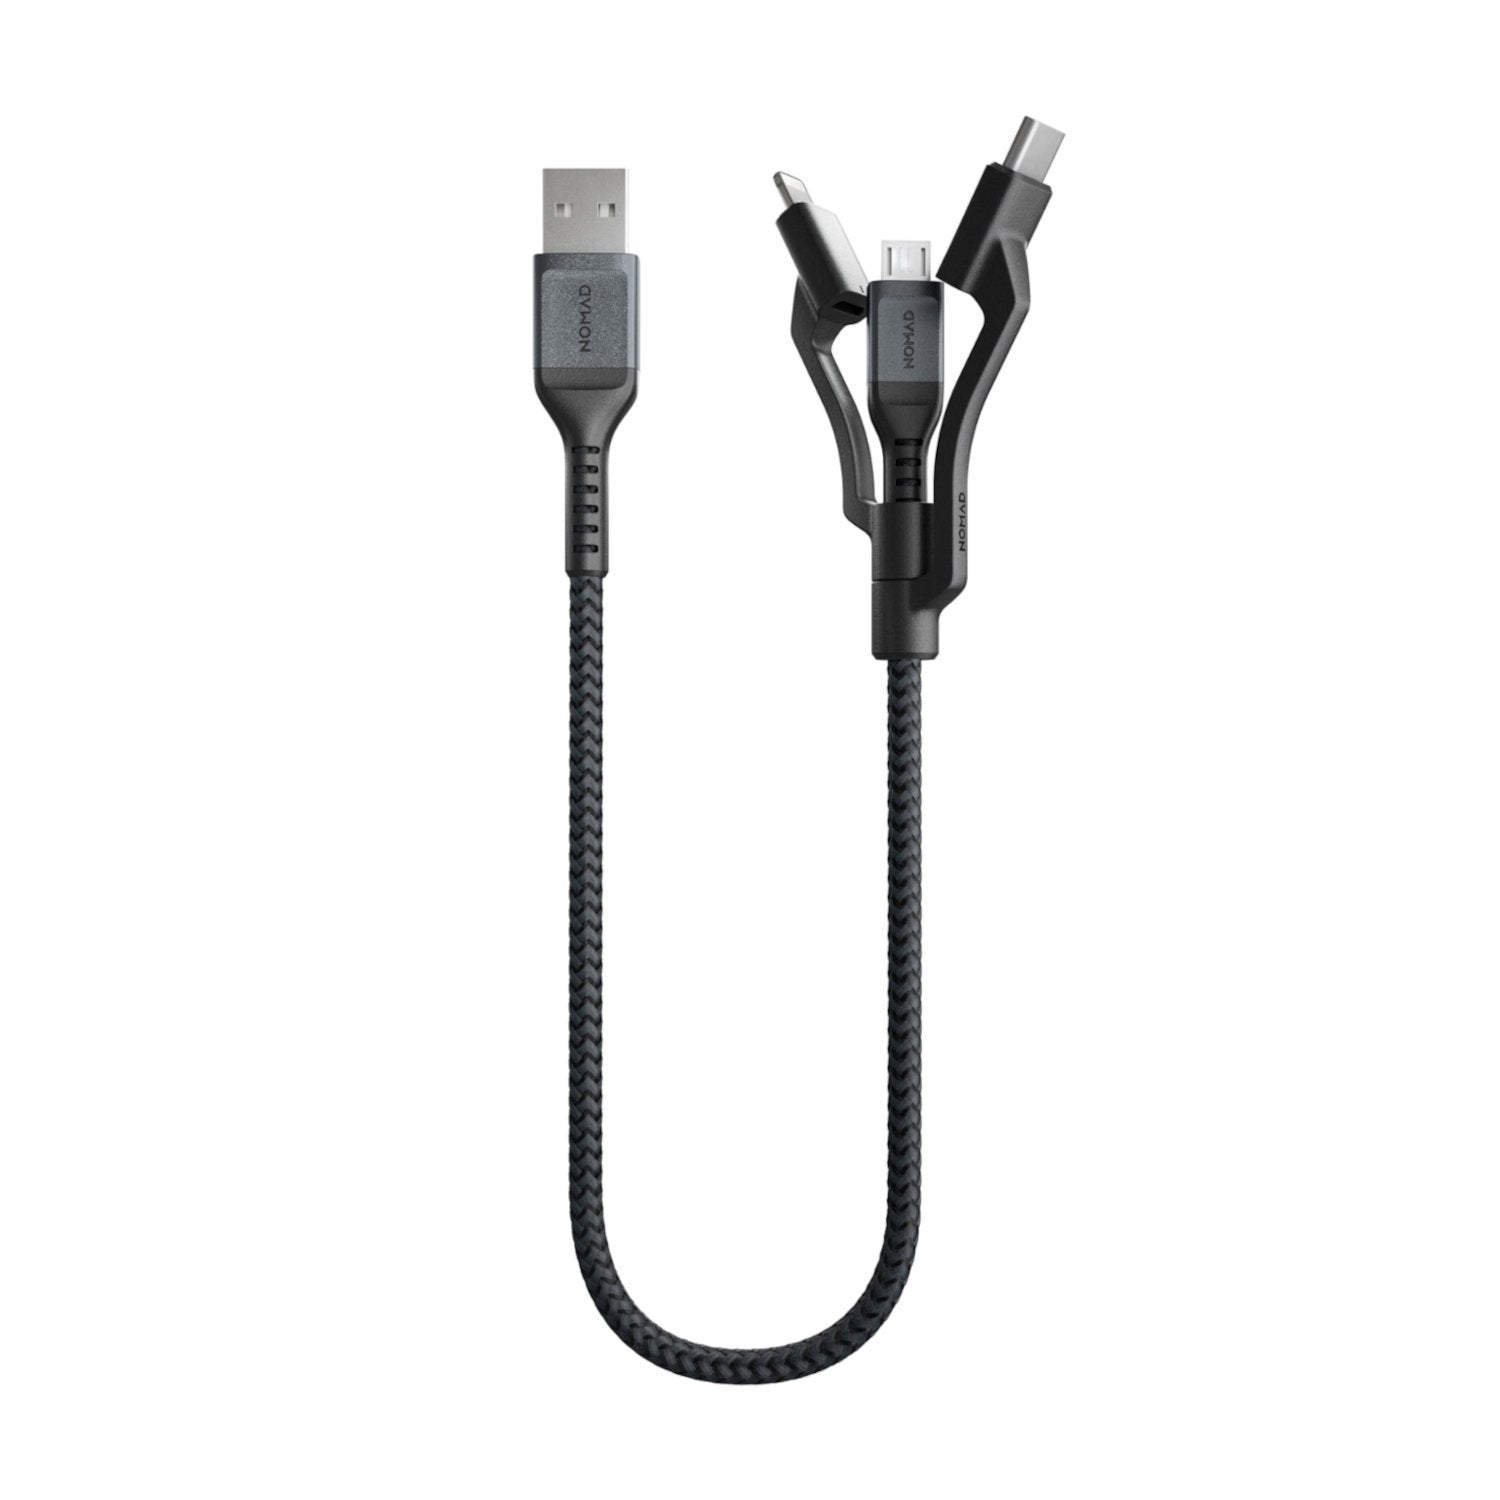 NOMAD Rugged 3-in-1 Cables 0.3M, Black Cable NOMAD 